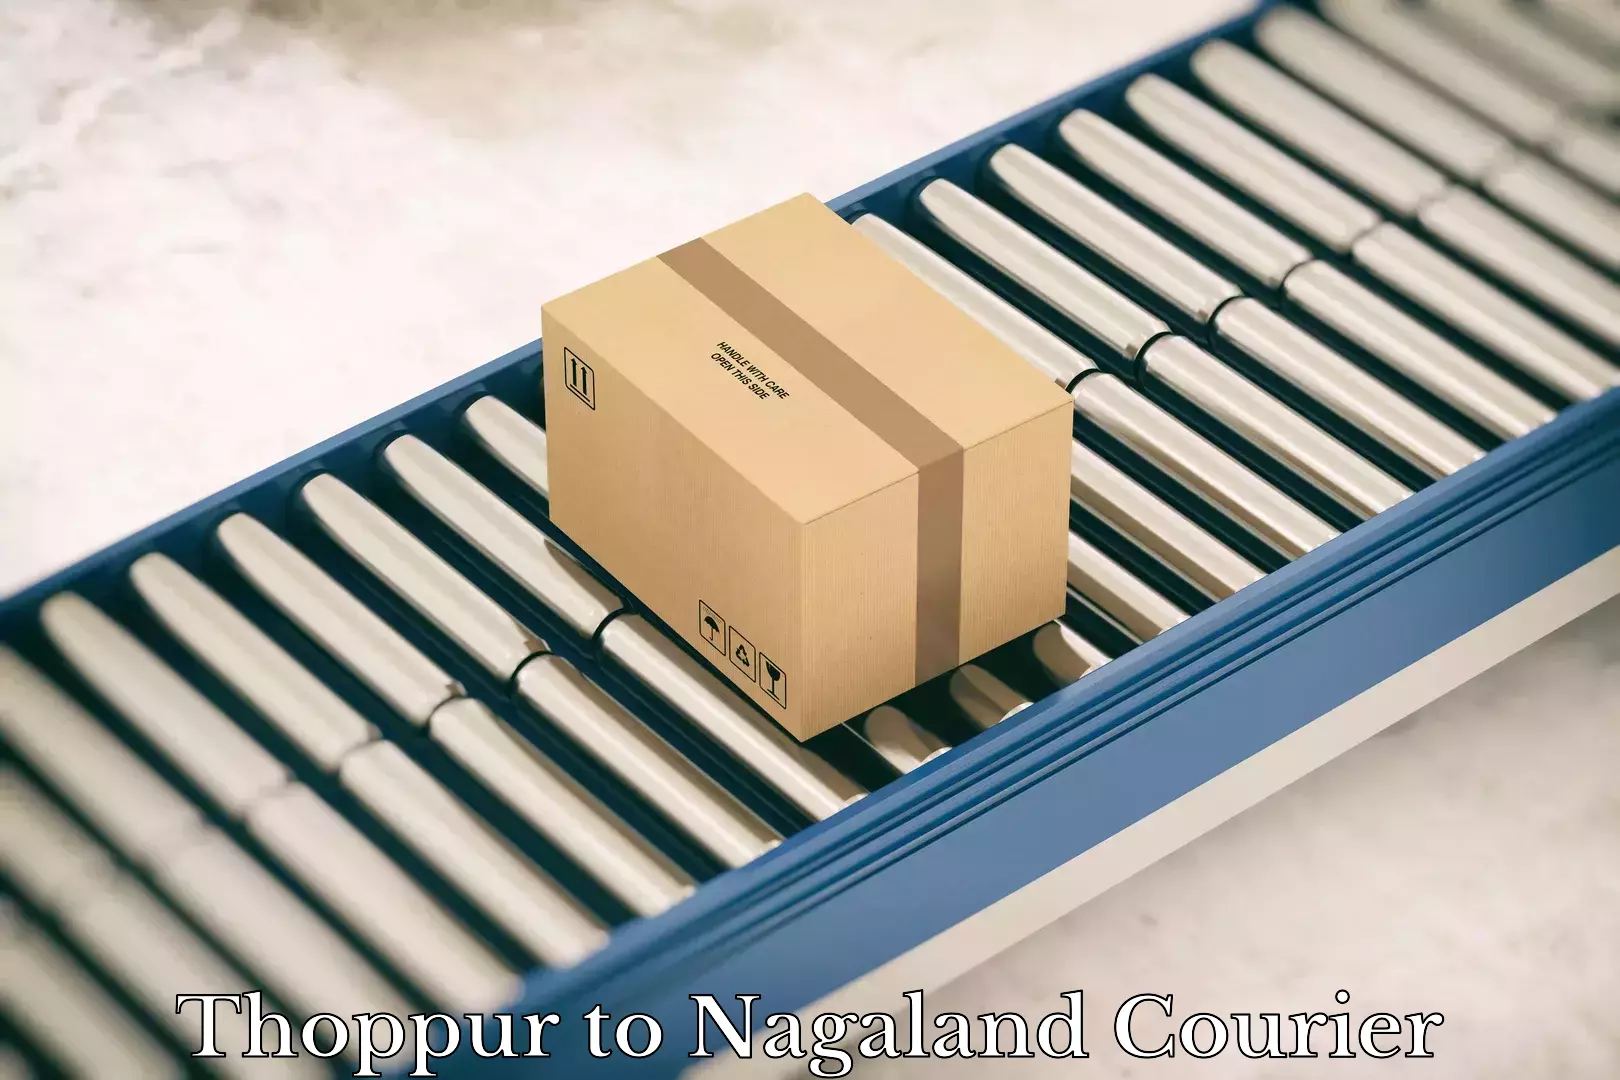 Global parcel delivery Thoppur to Nagaland